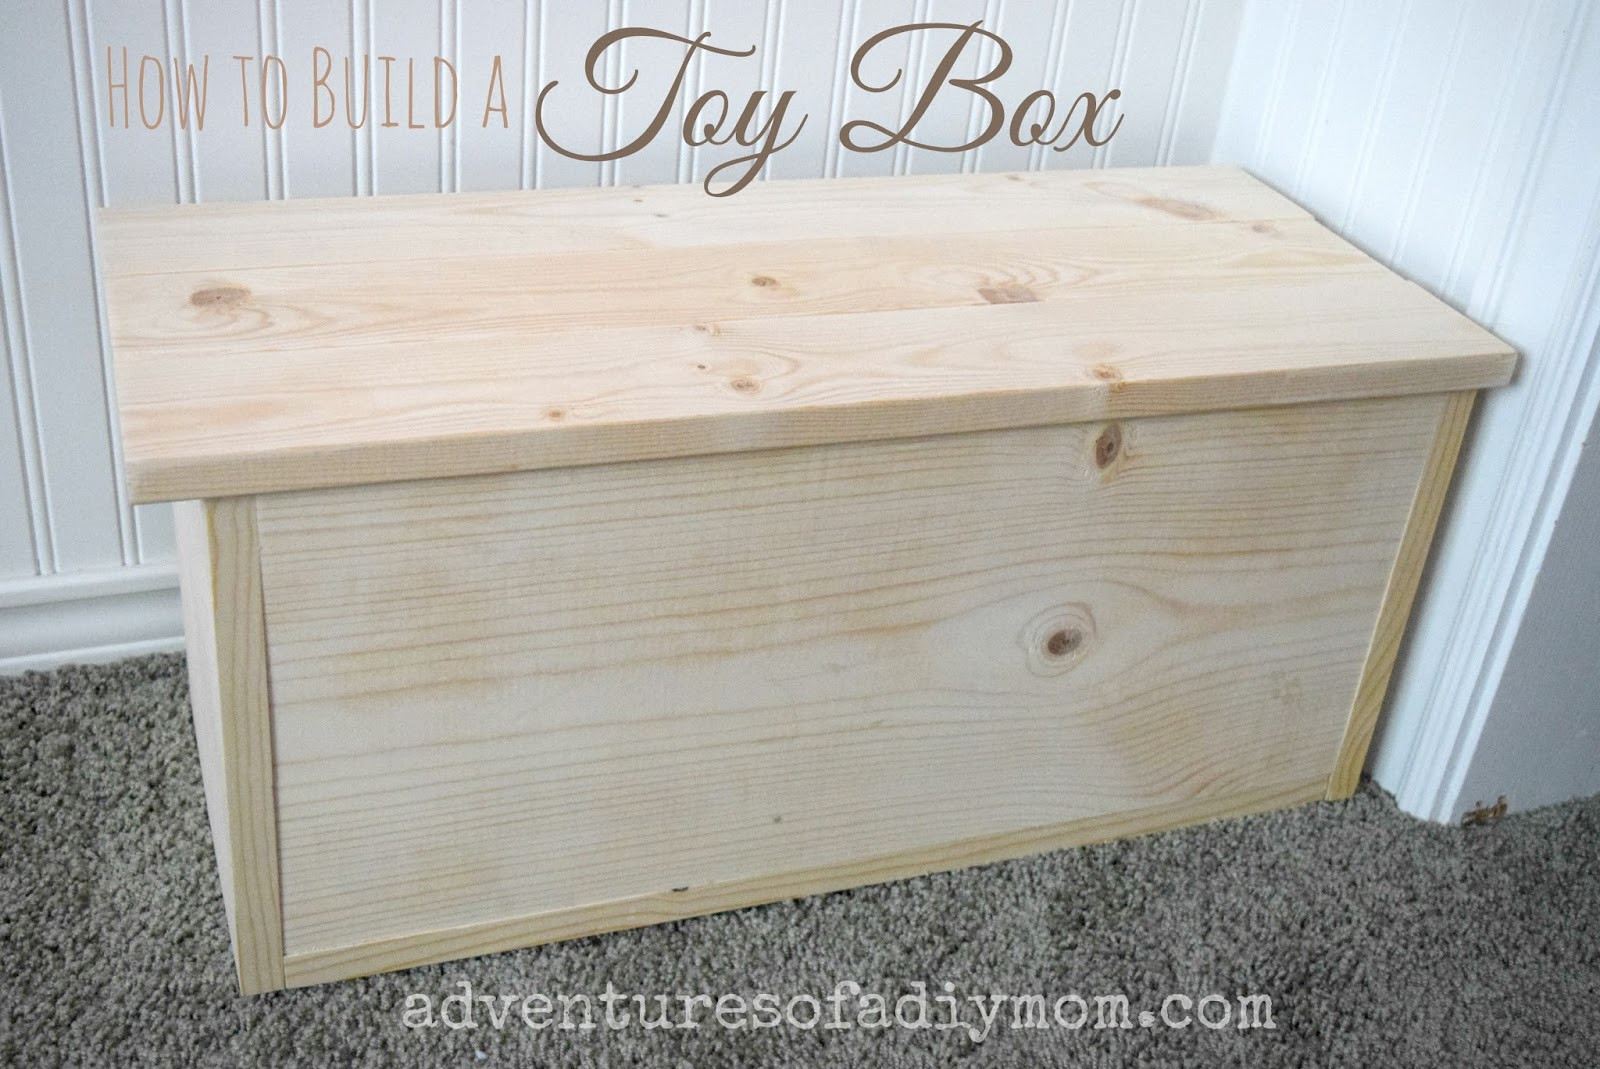 DIY Wood Toy Box
 How to Build a Toy Box Adventures of a DIY Mom